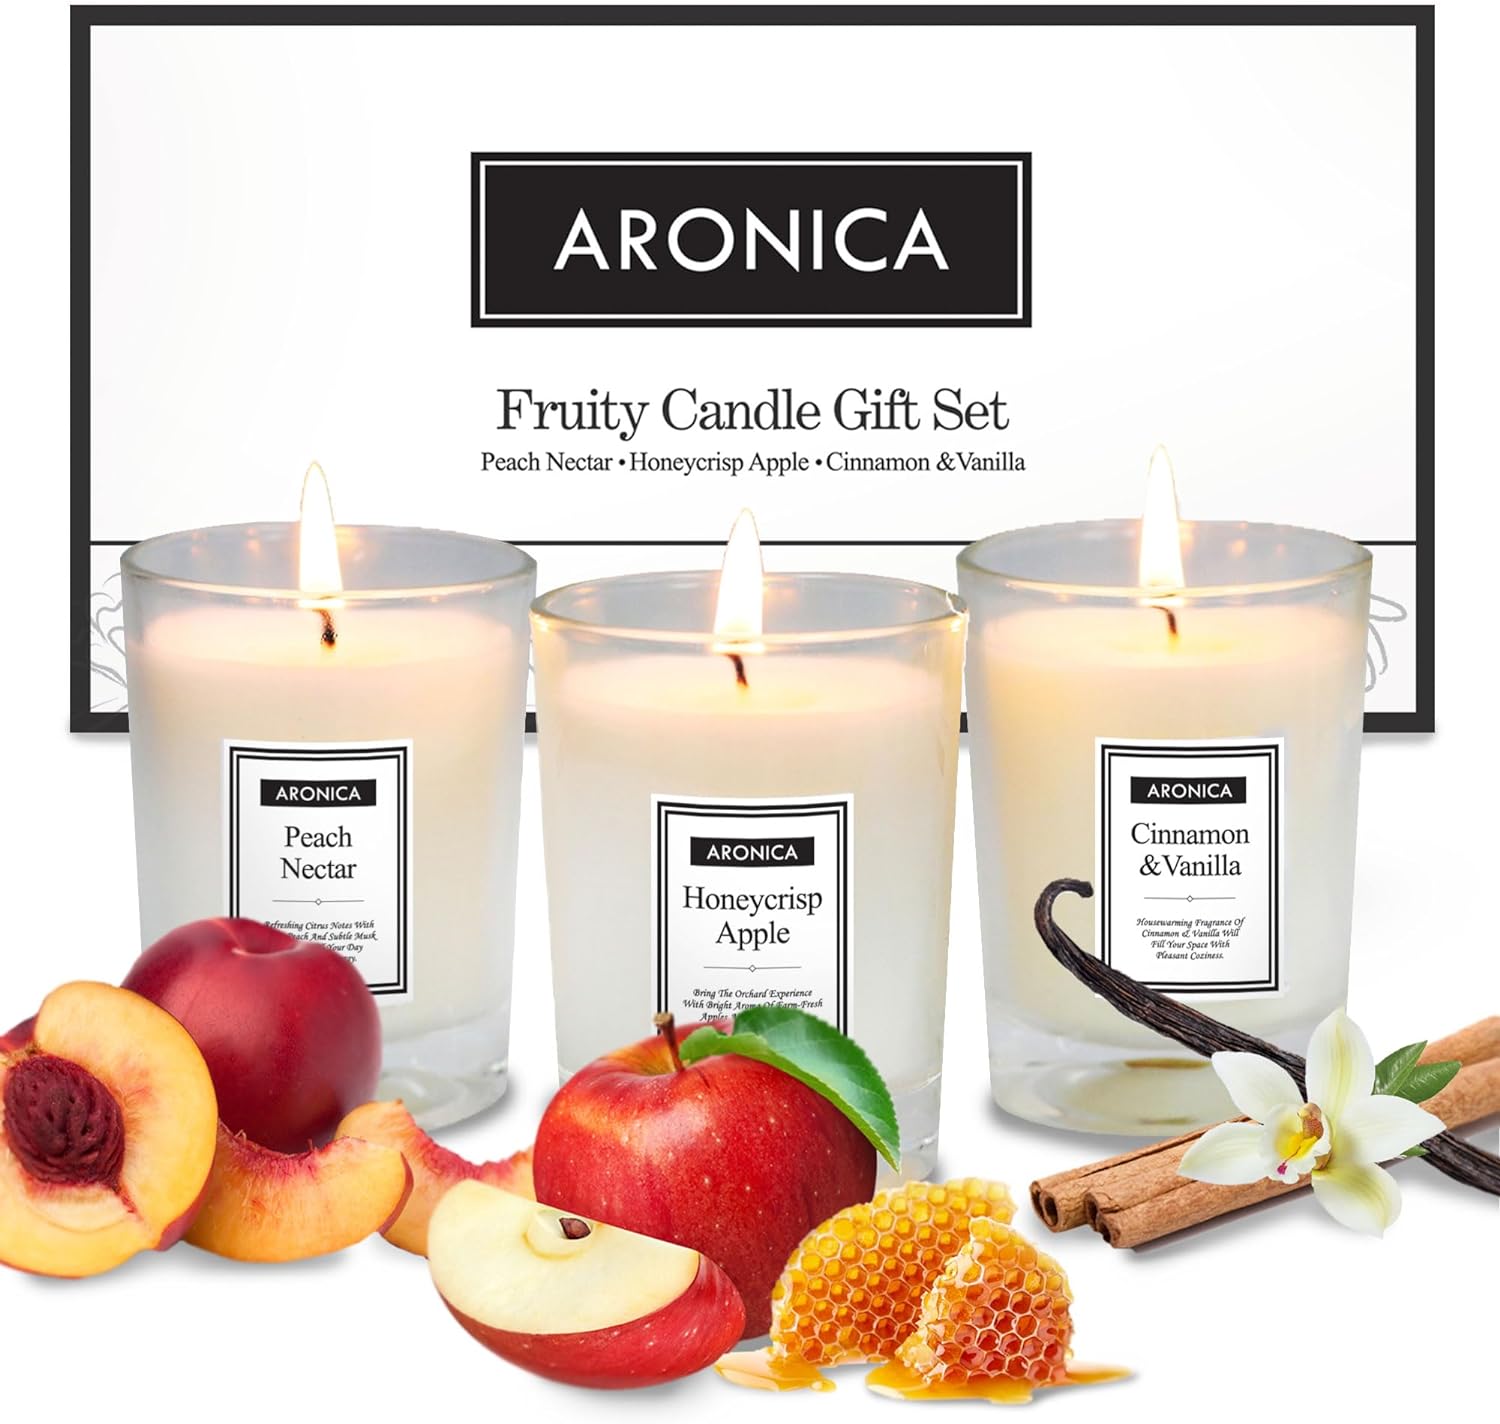 Fruity Candle Set - Fragrant Scented Candles for Women' Day, Bridal Showers, Baby Shower Hostess Gifts, Spring Celebrations, Perfect for Wedding and Holiday Presents - Set of 3, Fruity Scent